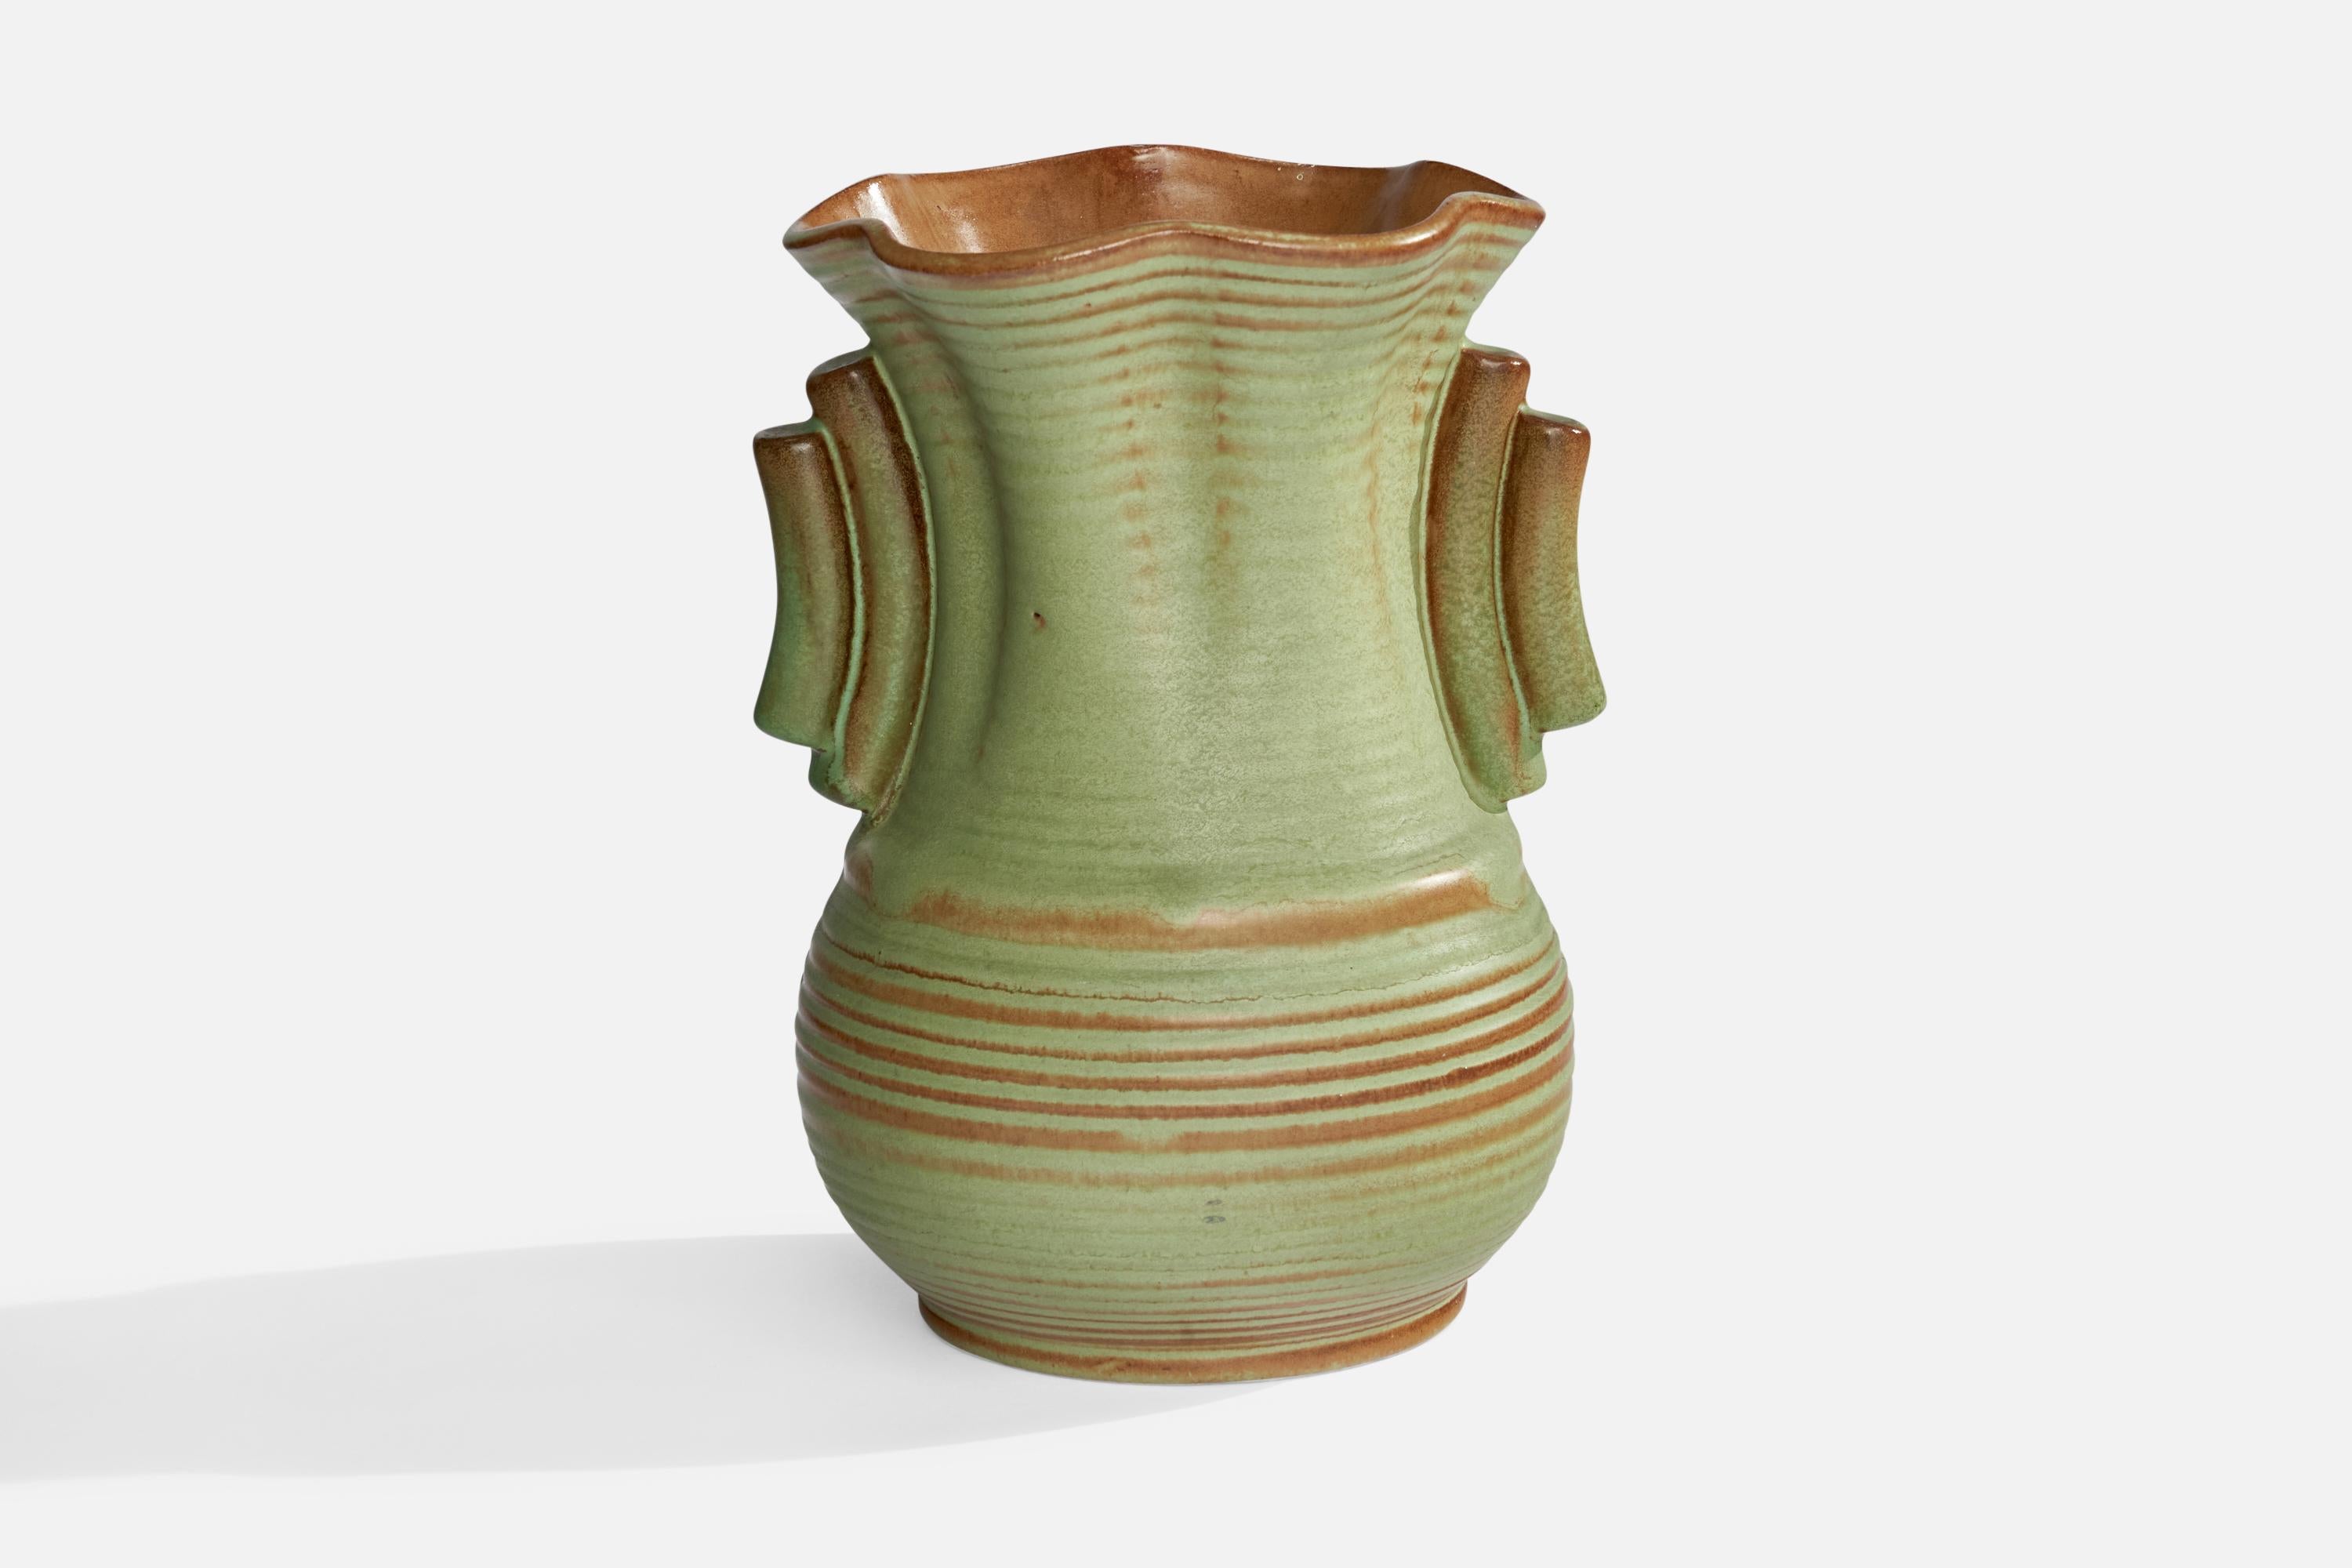 A green-glazed and incised vase designed and produced by Andersson & Johansson, Höganäs, Sweden, c. 1940s.